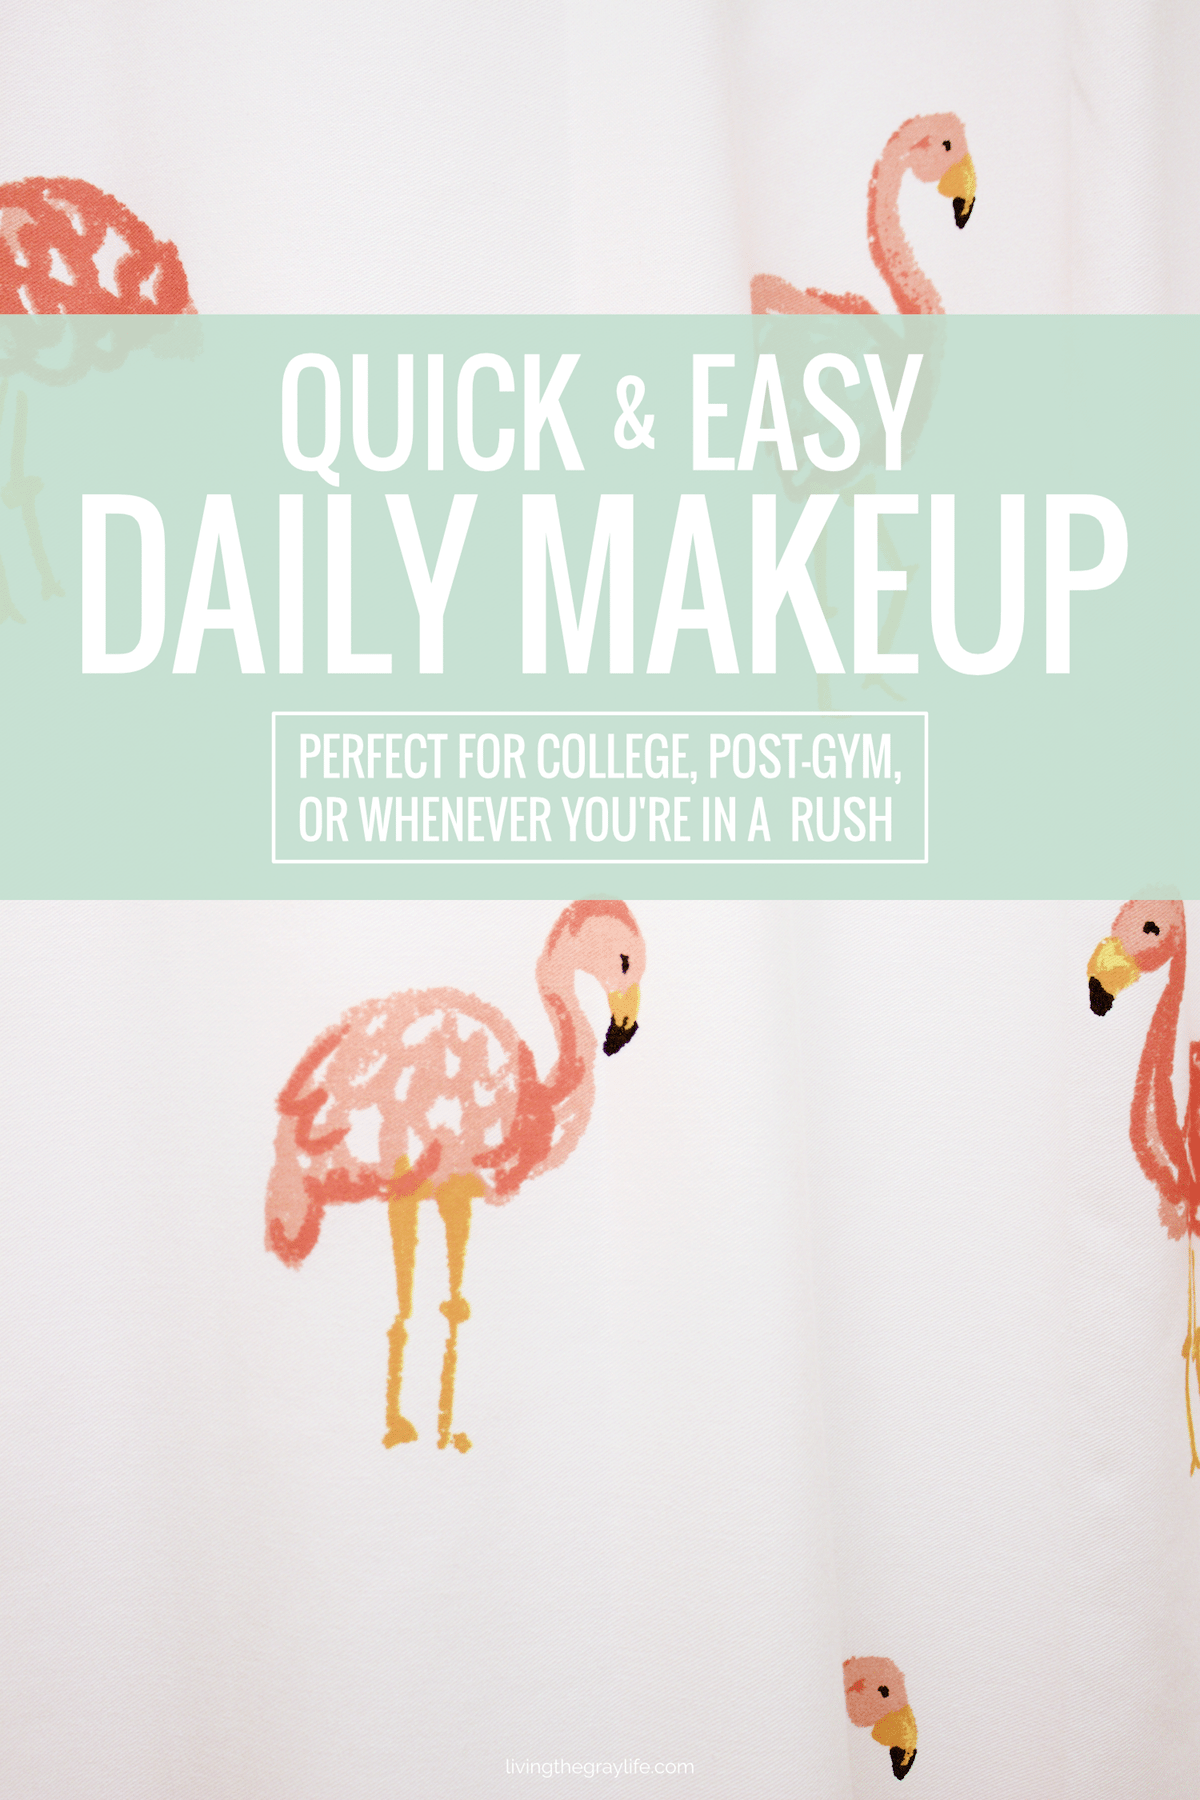 Quick & easy daily makeup perfect for college students, post-gym routines, or if you're in a rush!